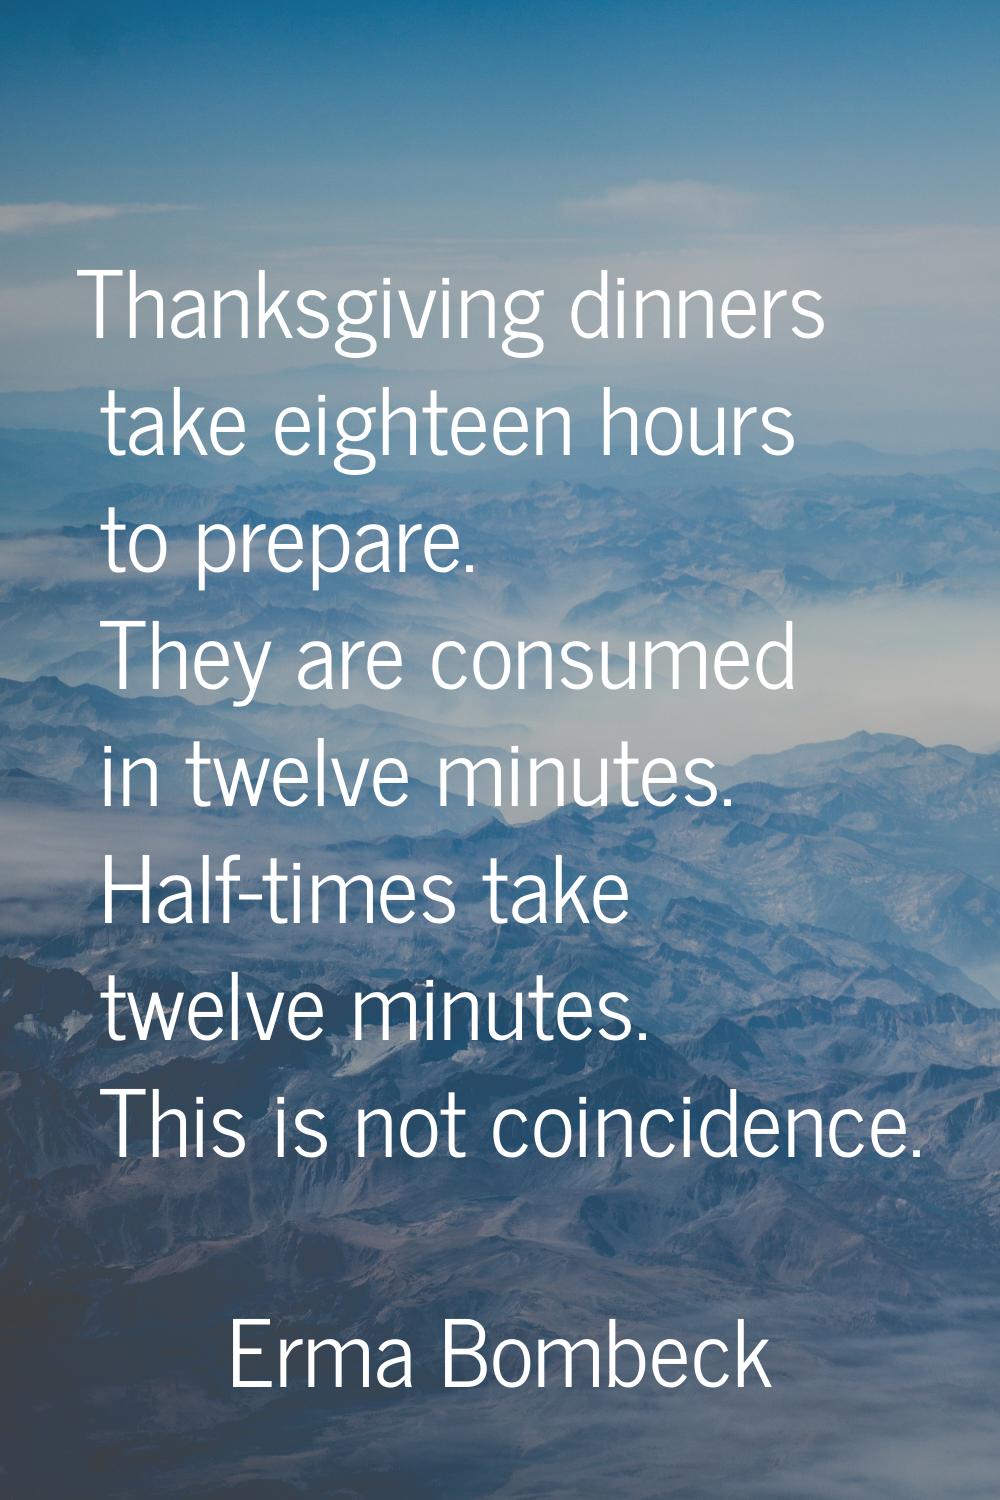 Thanksgiving dinners take eighteen hours to prepare. They are consumed in twelve minutes. Half-time